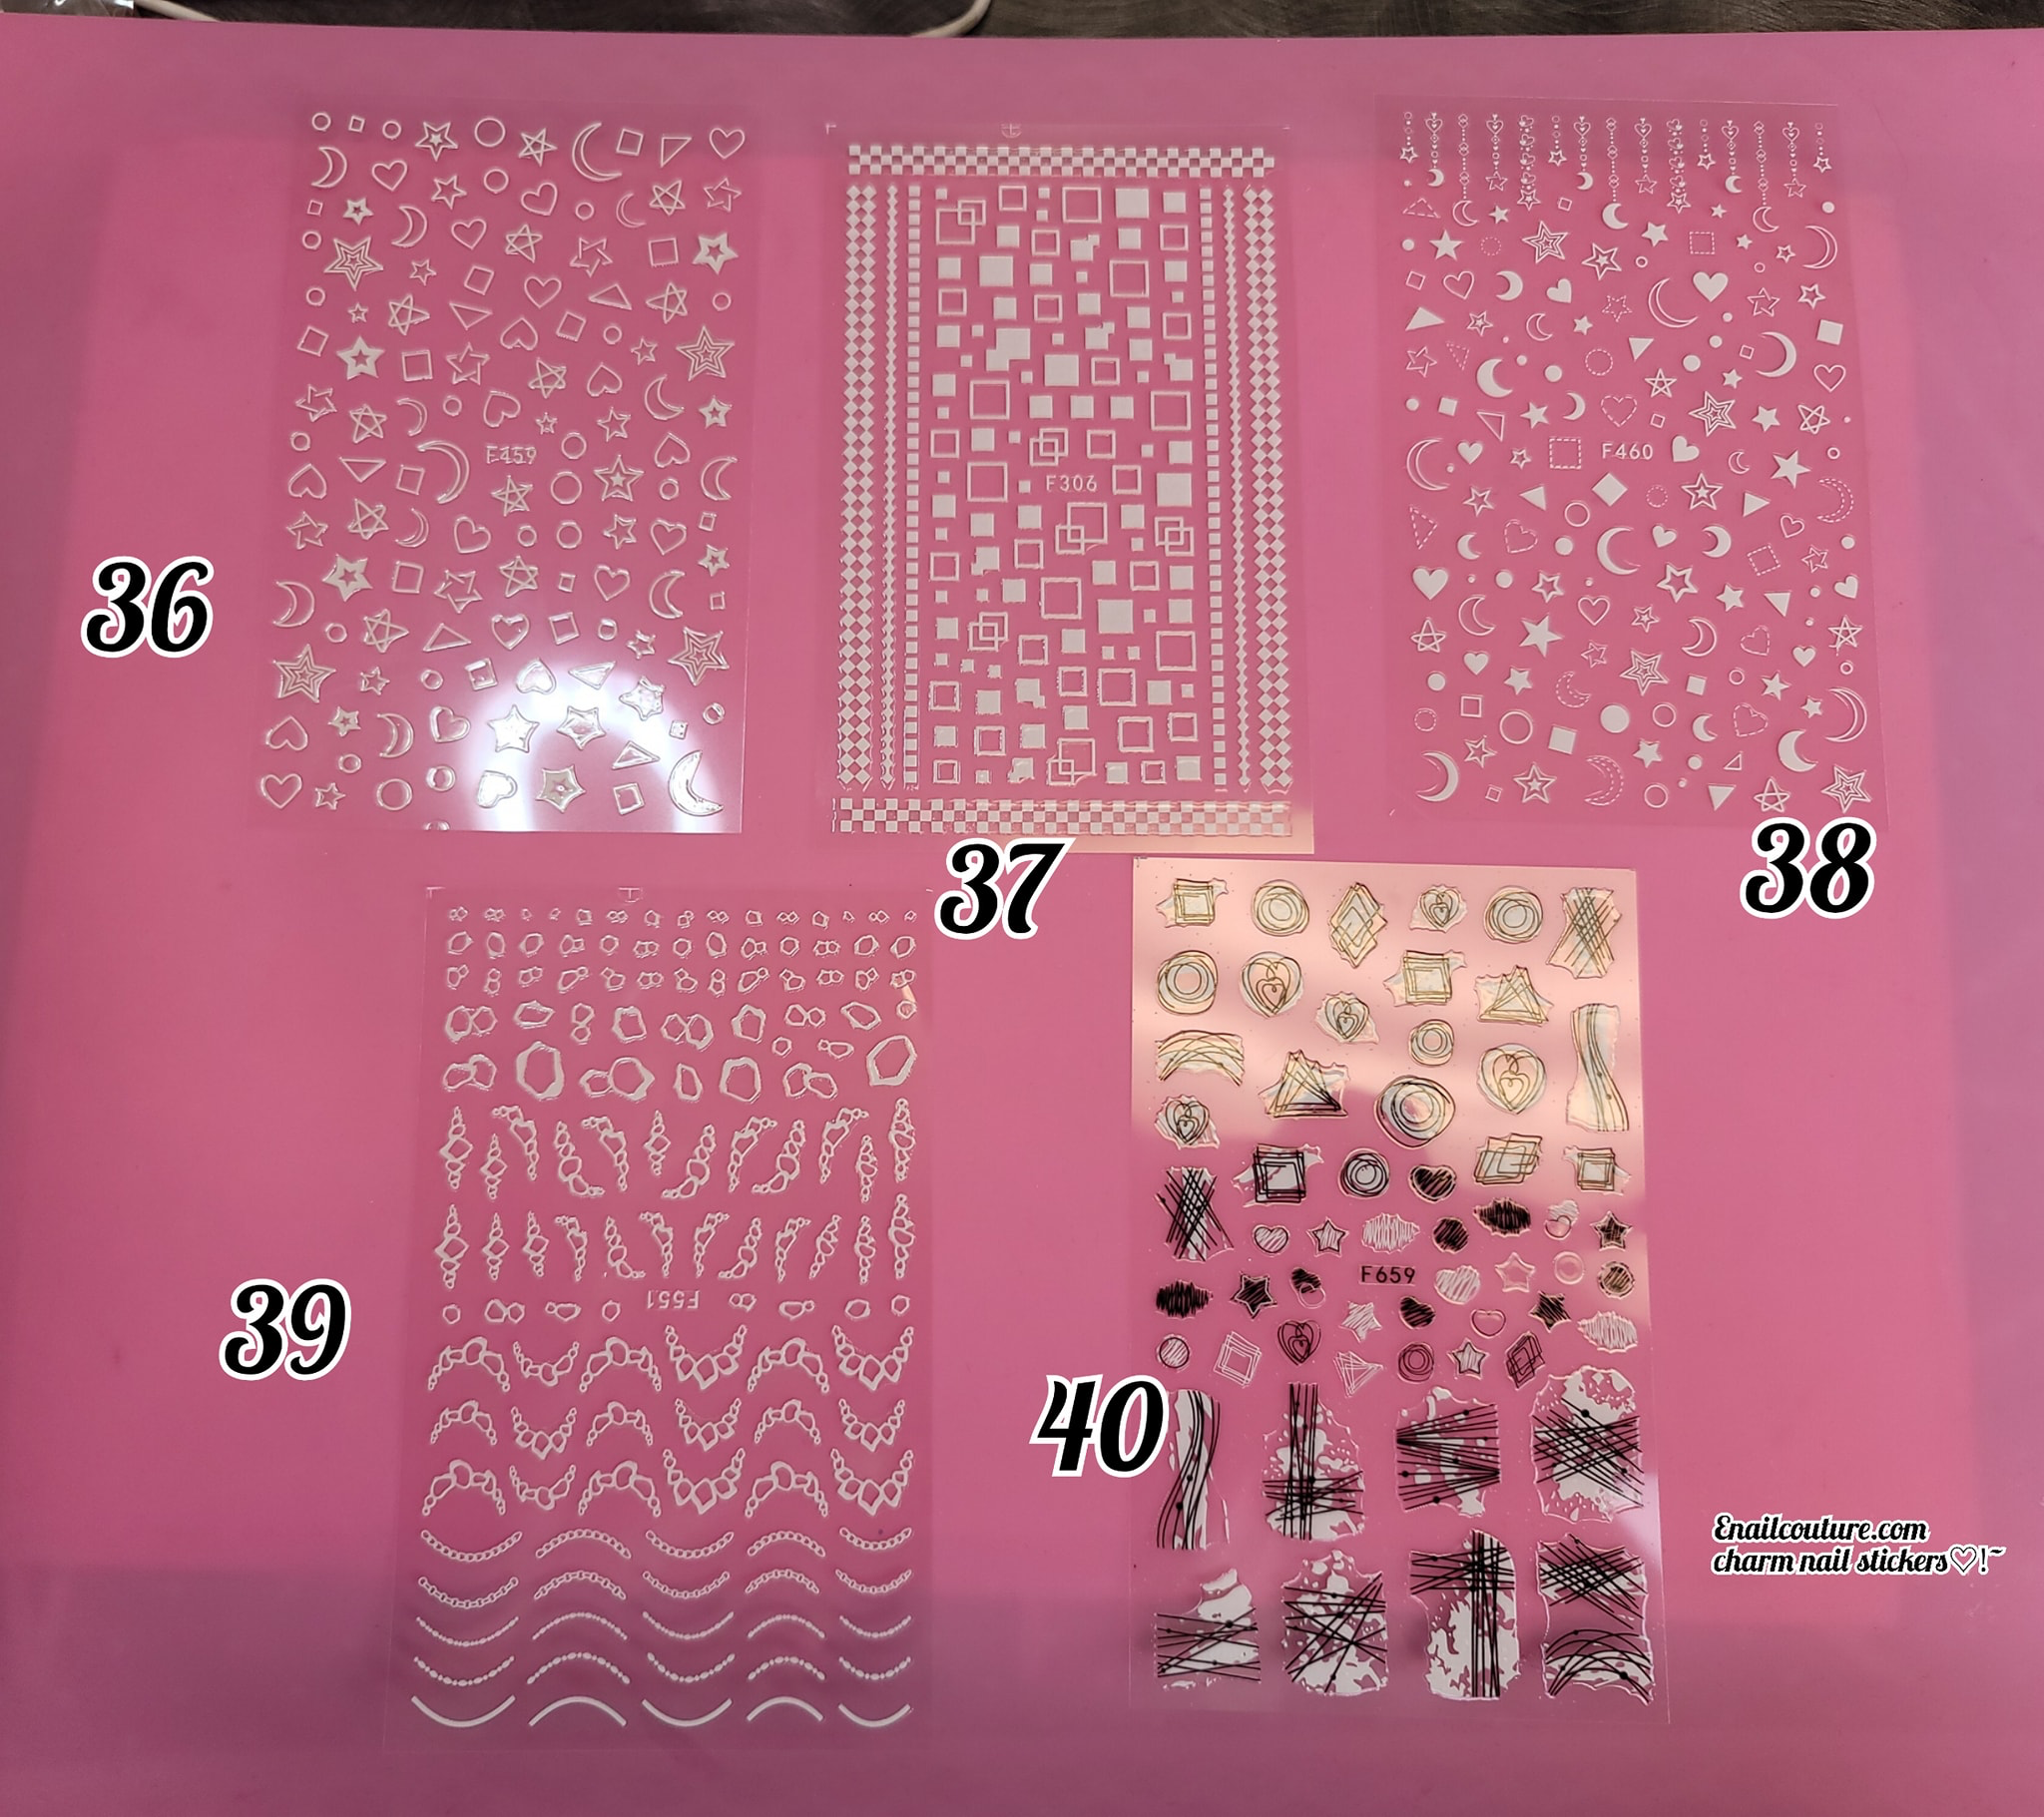 Charm Nail sticker, (flat & 3D Self-AdhesiveNail Decals Leaf Nail Art Stickers Colorful Mixed Nail Decorations)view ALL